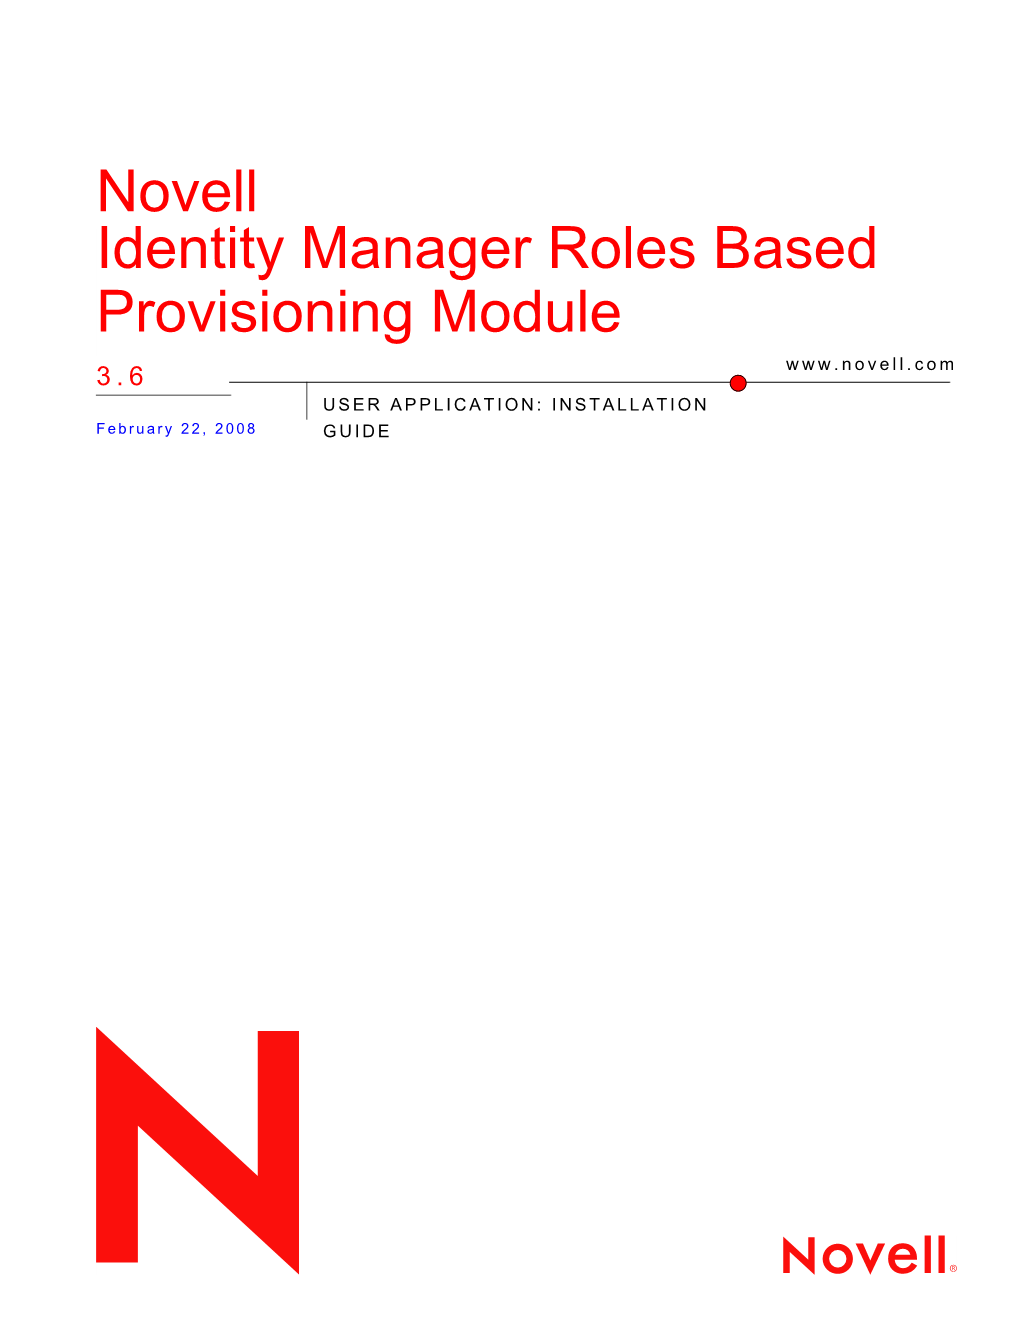 Identity Manager Roles Based Provisioning Module 3.6 User Application: Installation Guide Novdocx(En)6 April 2007